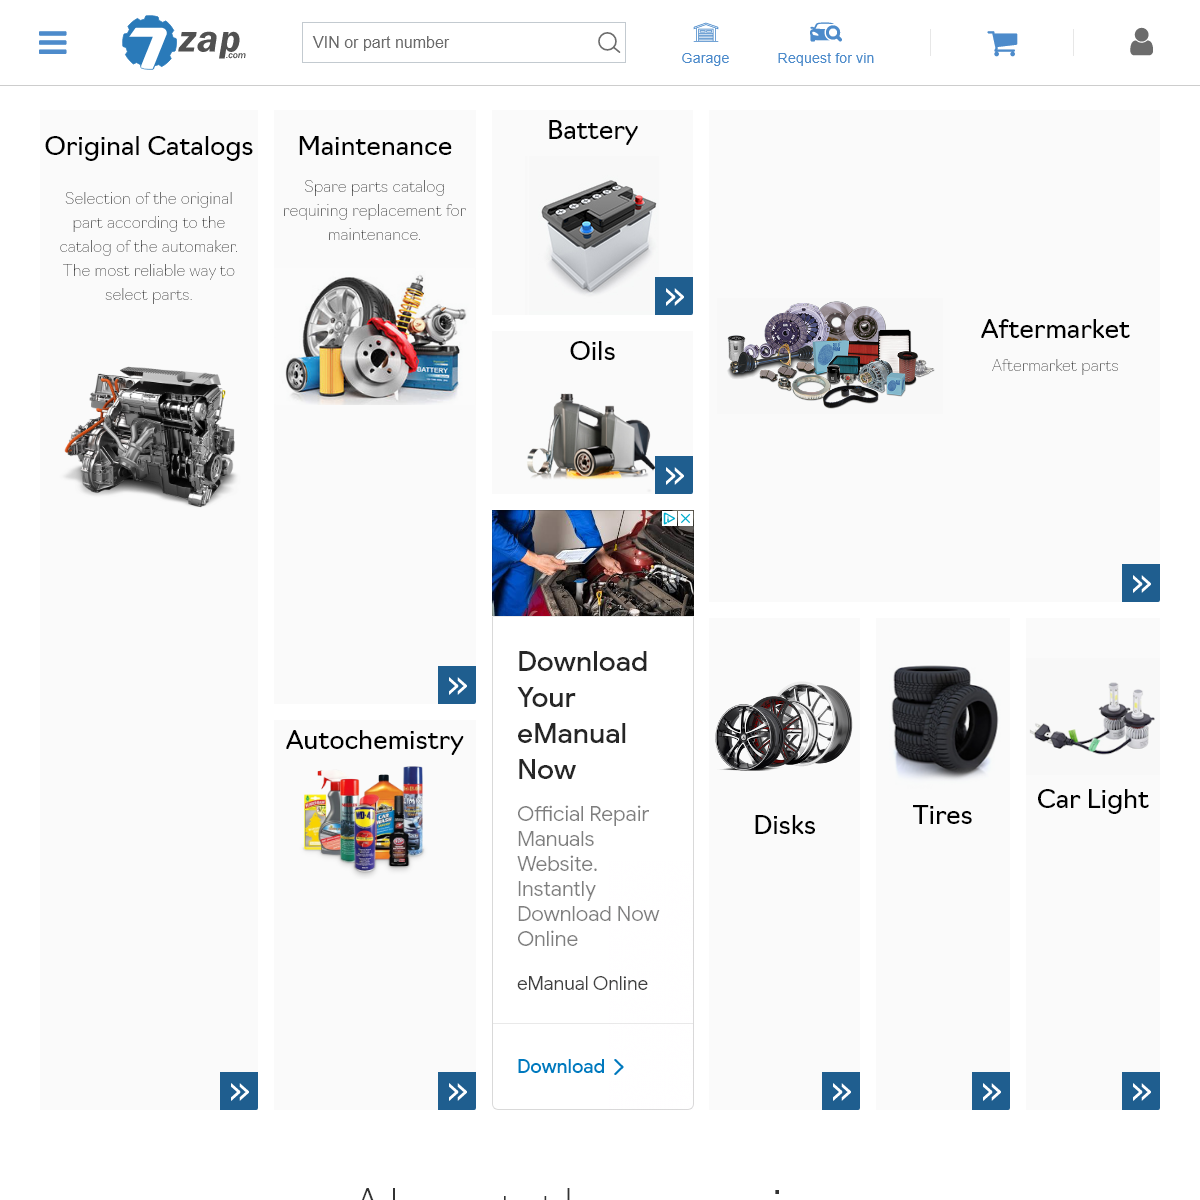 A complete backup of 7zap.com